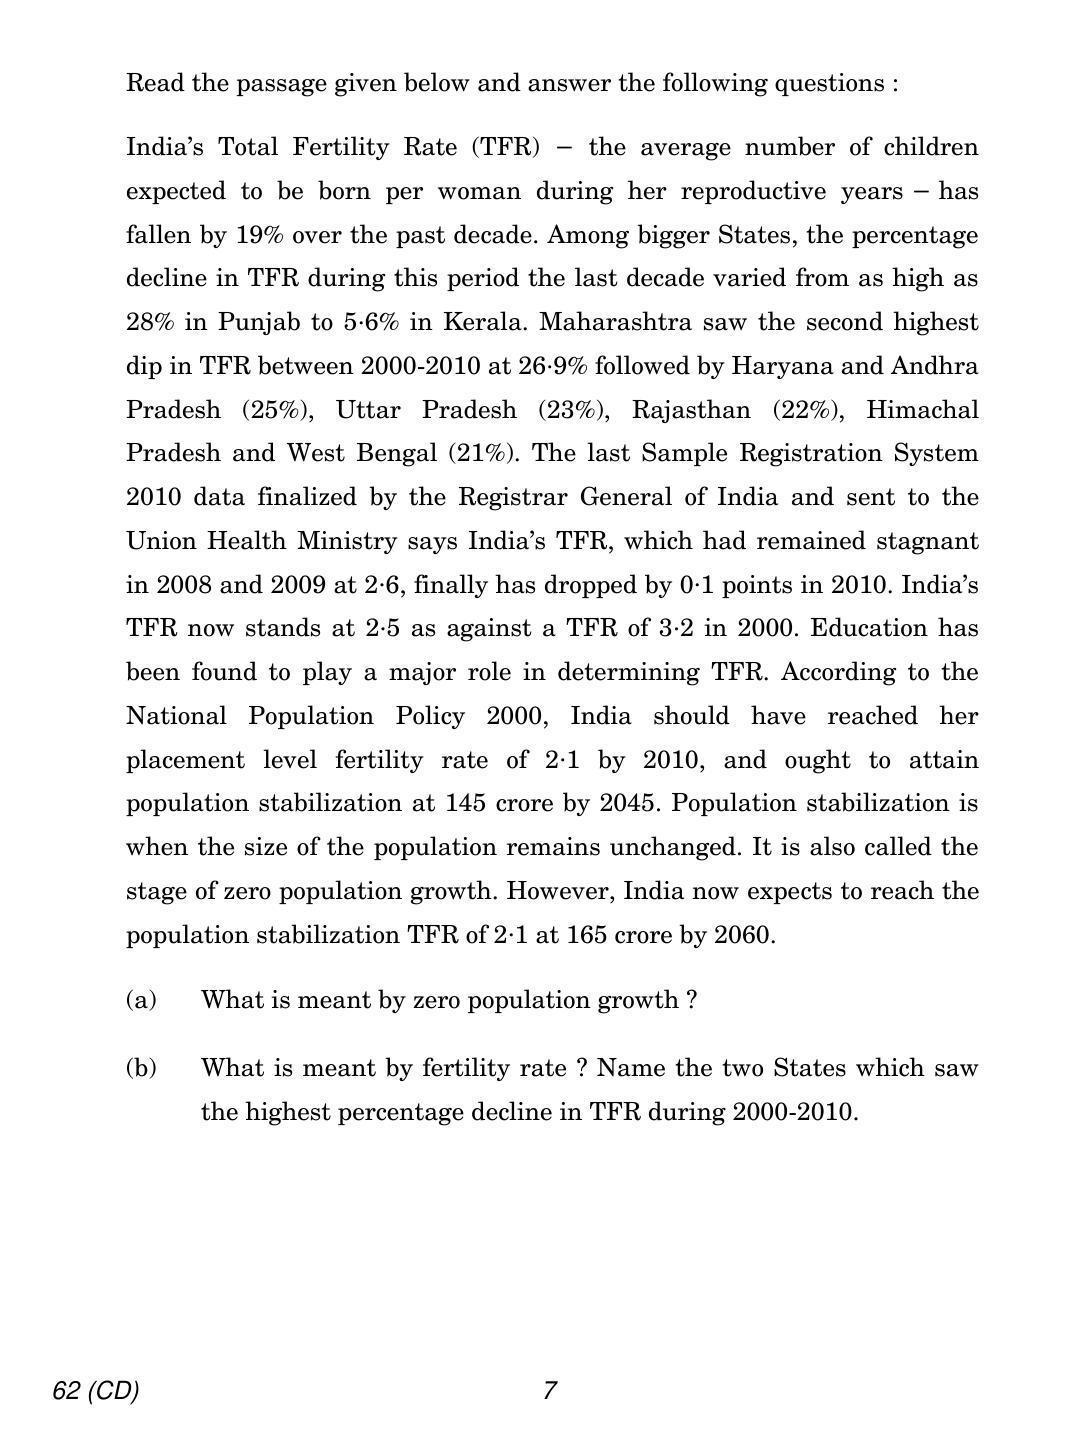 CBSE Class 12 62 SOCIOLOGY CD 2018 Question Paper - Page 7